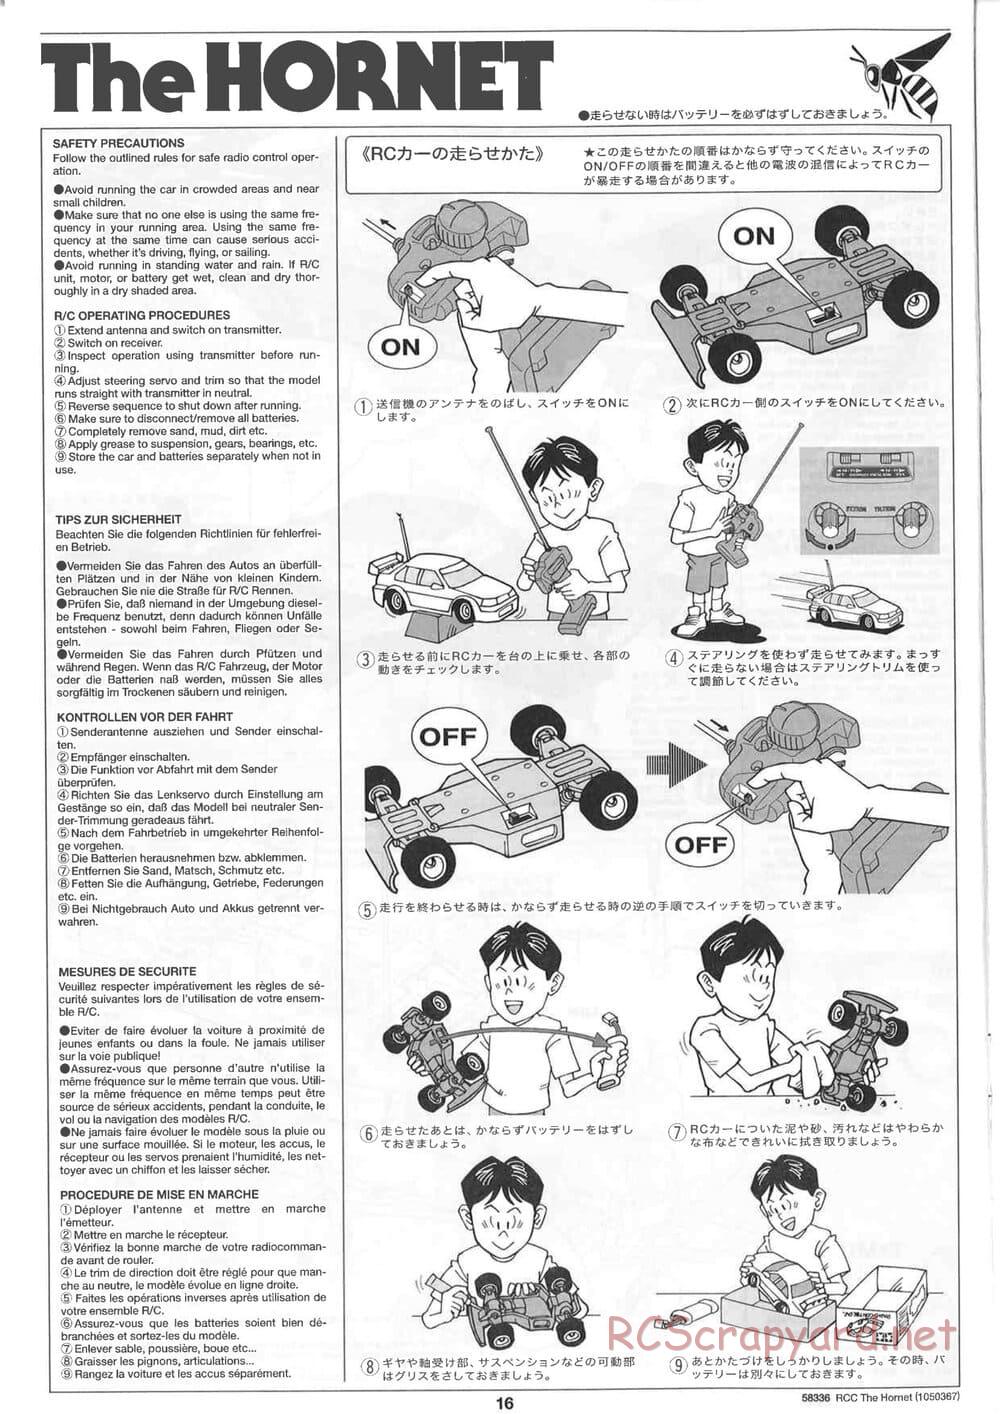 Tamiya - The Hornet (2004) - GH Chassis - Manual - Page 16